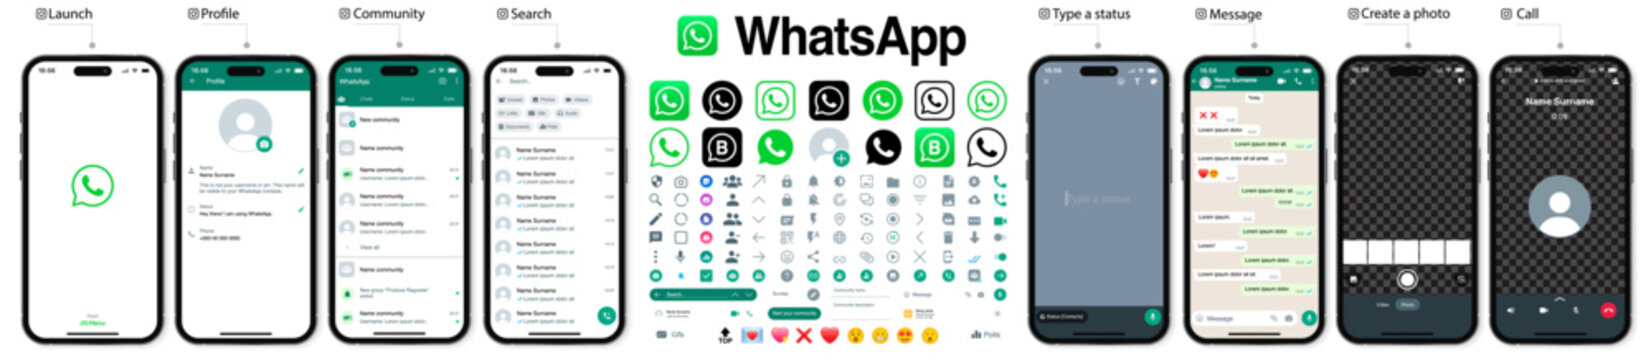 Mobile messenger screen inspired by whatsapp. Vector illustration. Whatsapp screen mockup set. Whatsapp social media template and interface template.